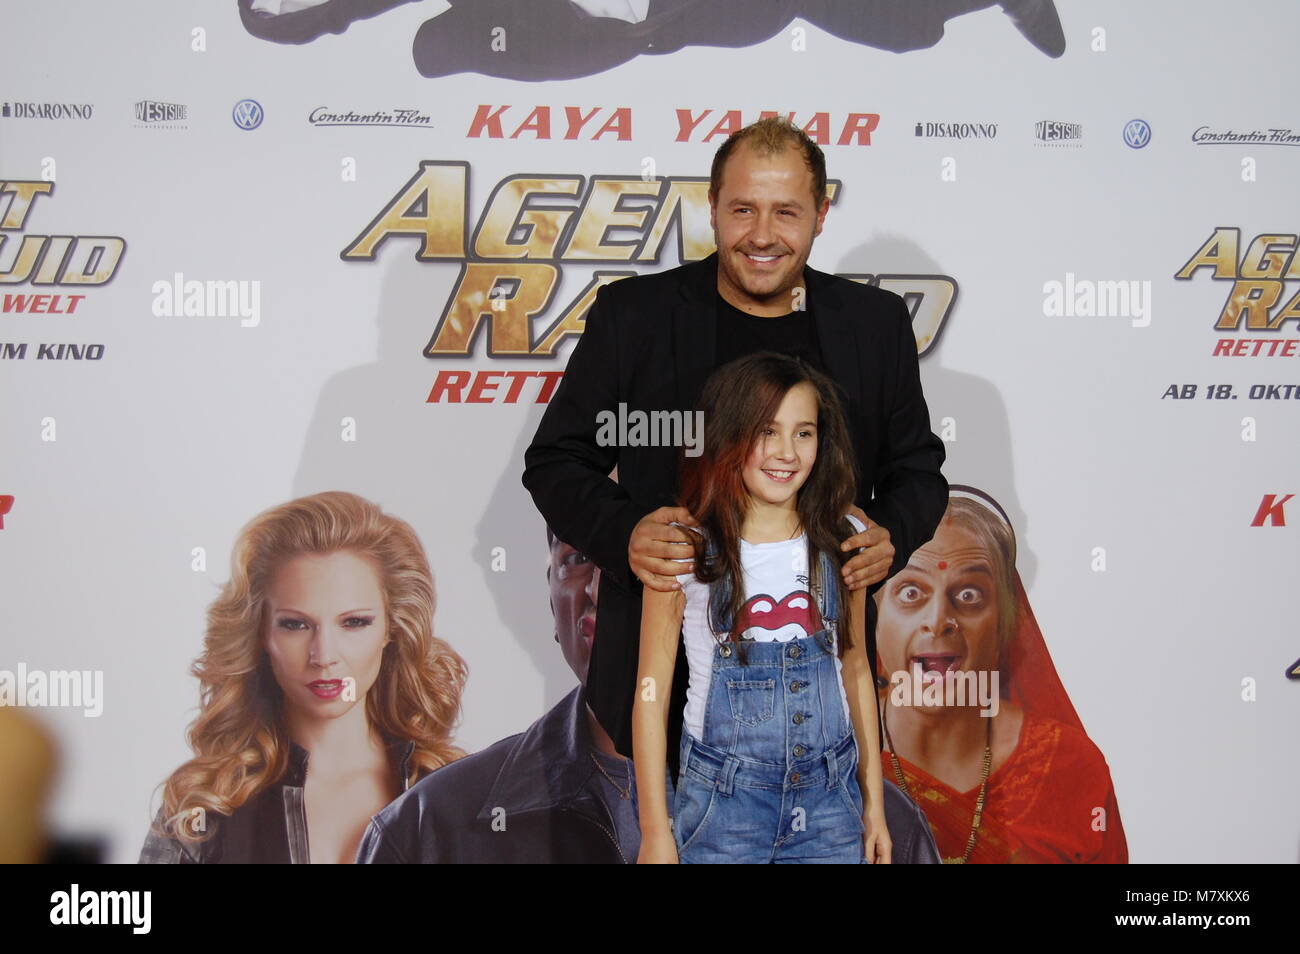 Willi Herren and his daughter Alessia Herren attend the 'Agent Ranjid' Germany Premiere on October 17, 2012 in Cologne, Germany. Stock Photo